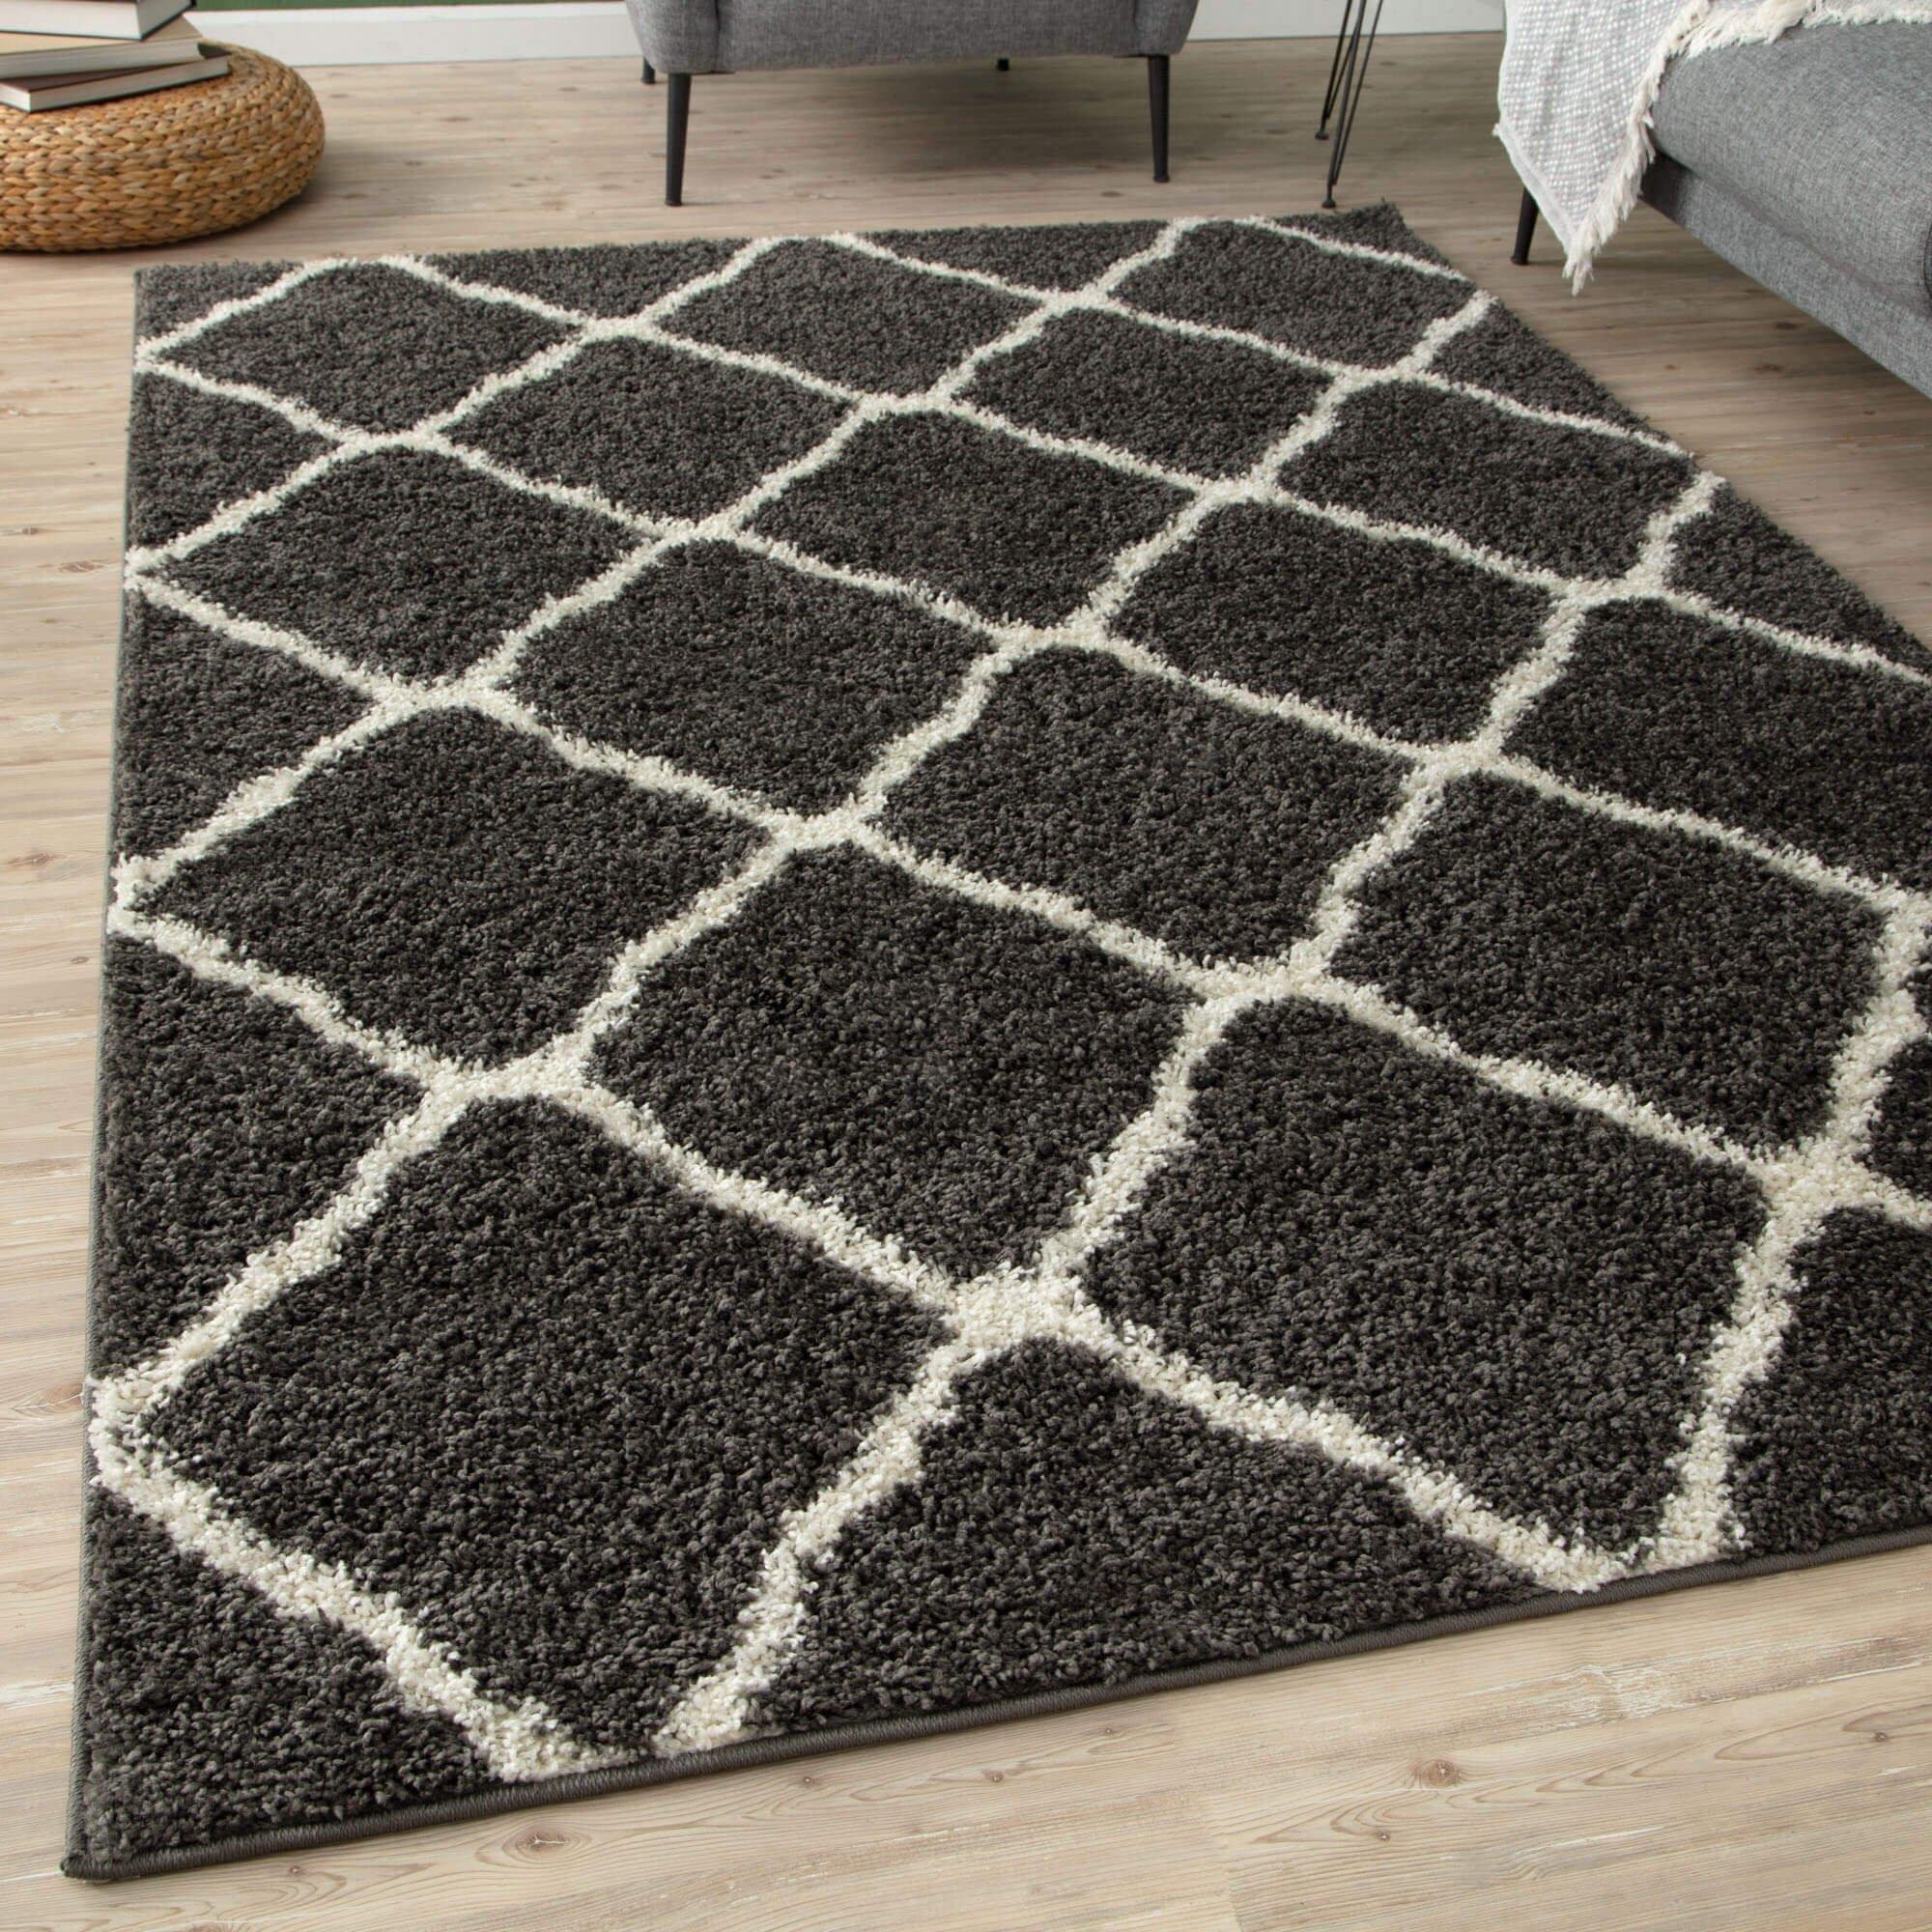 Myshaggy Collection Rugs Moroccan Design in Dark Grey - 385D - image 1